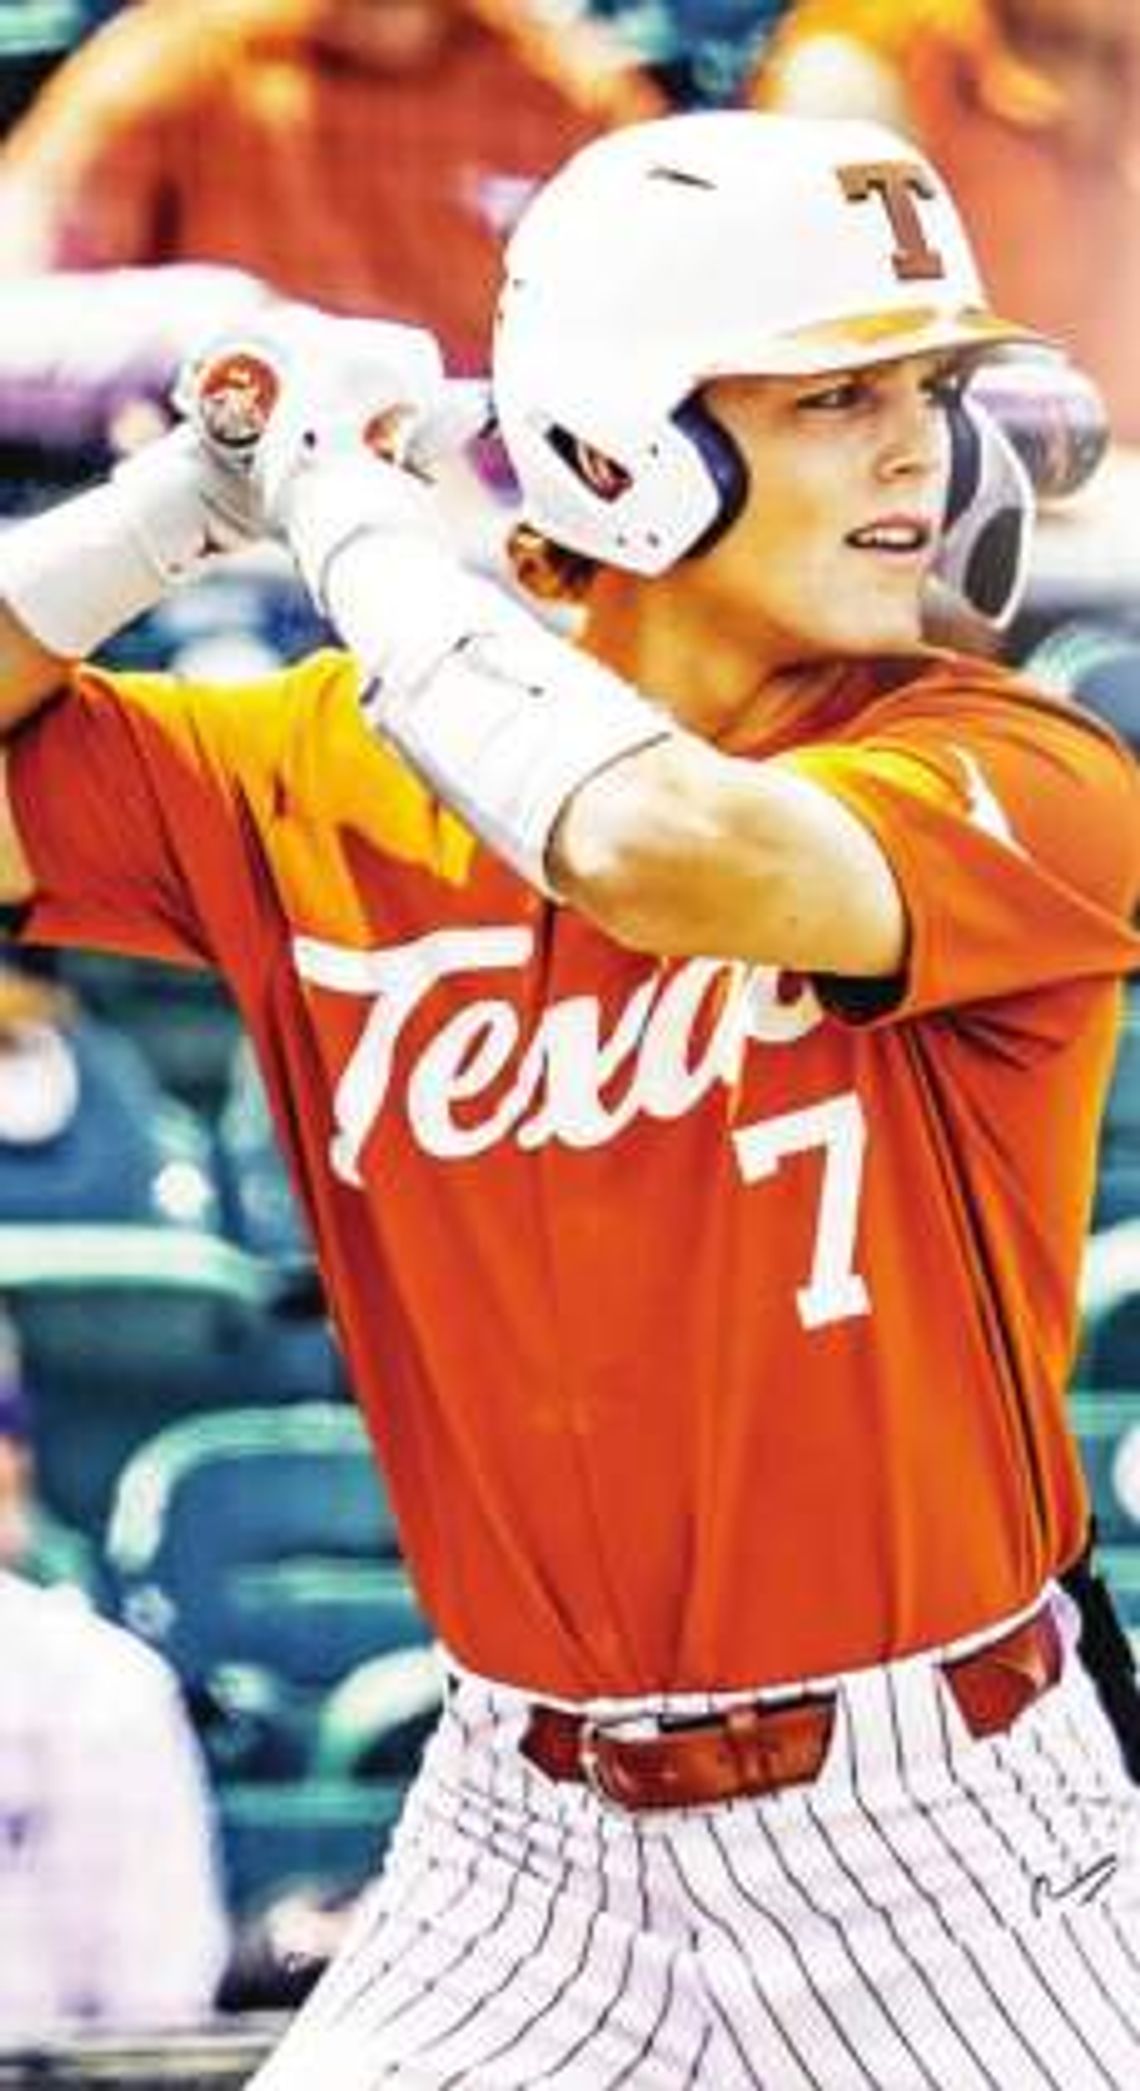 Two Boerne ISD athletes to play in College World Series